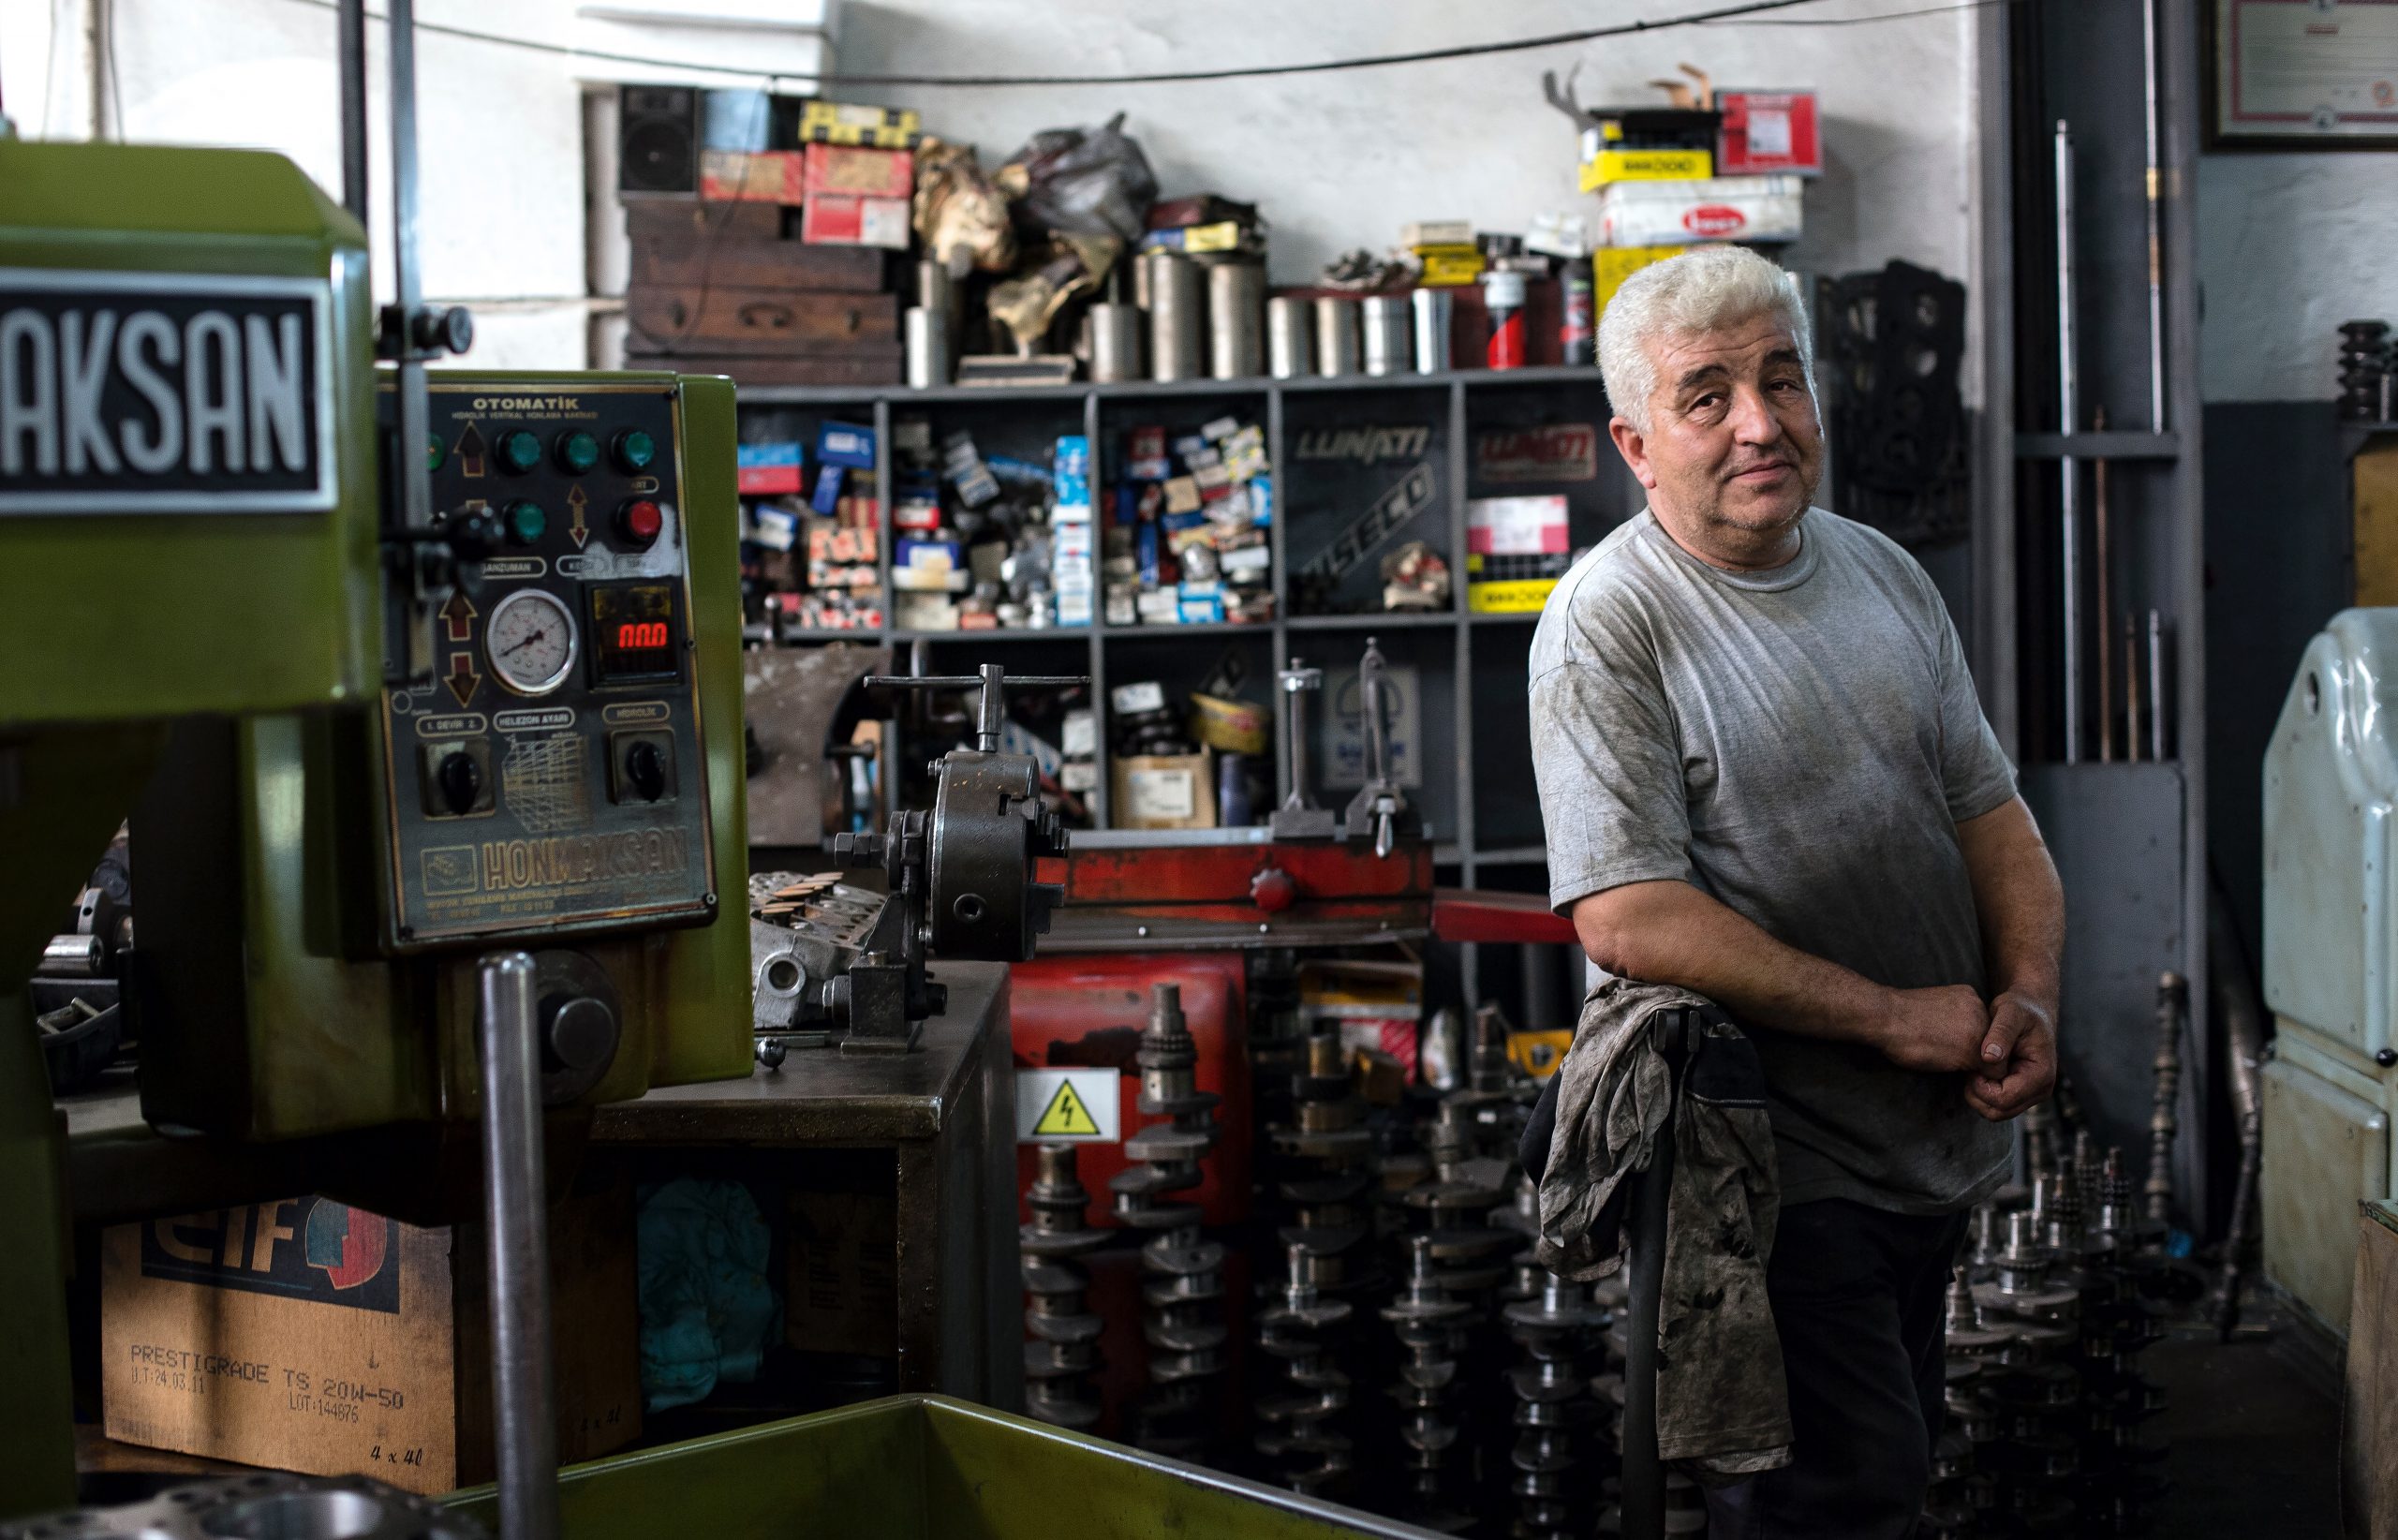 An older gentleman posed inside his business with a bunch of tools and shelving